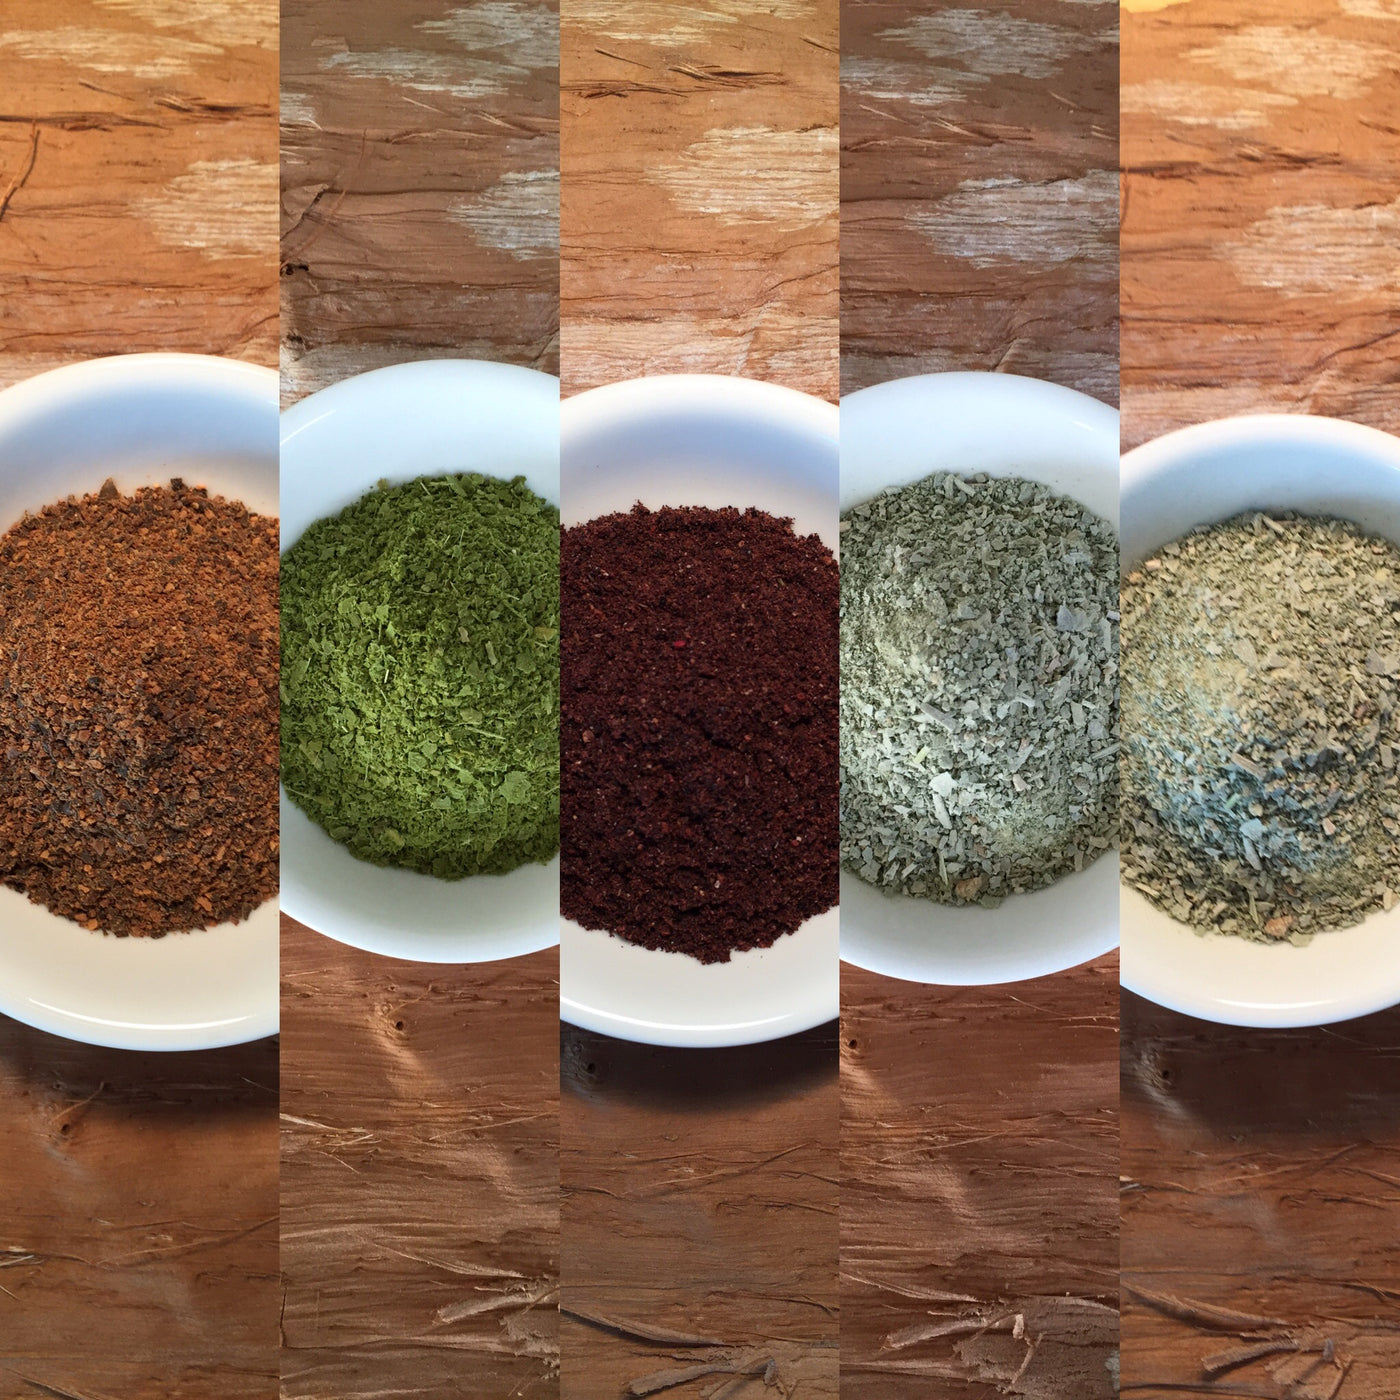 Australian Native Herbs and Spices